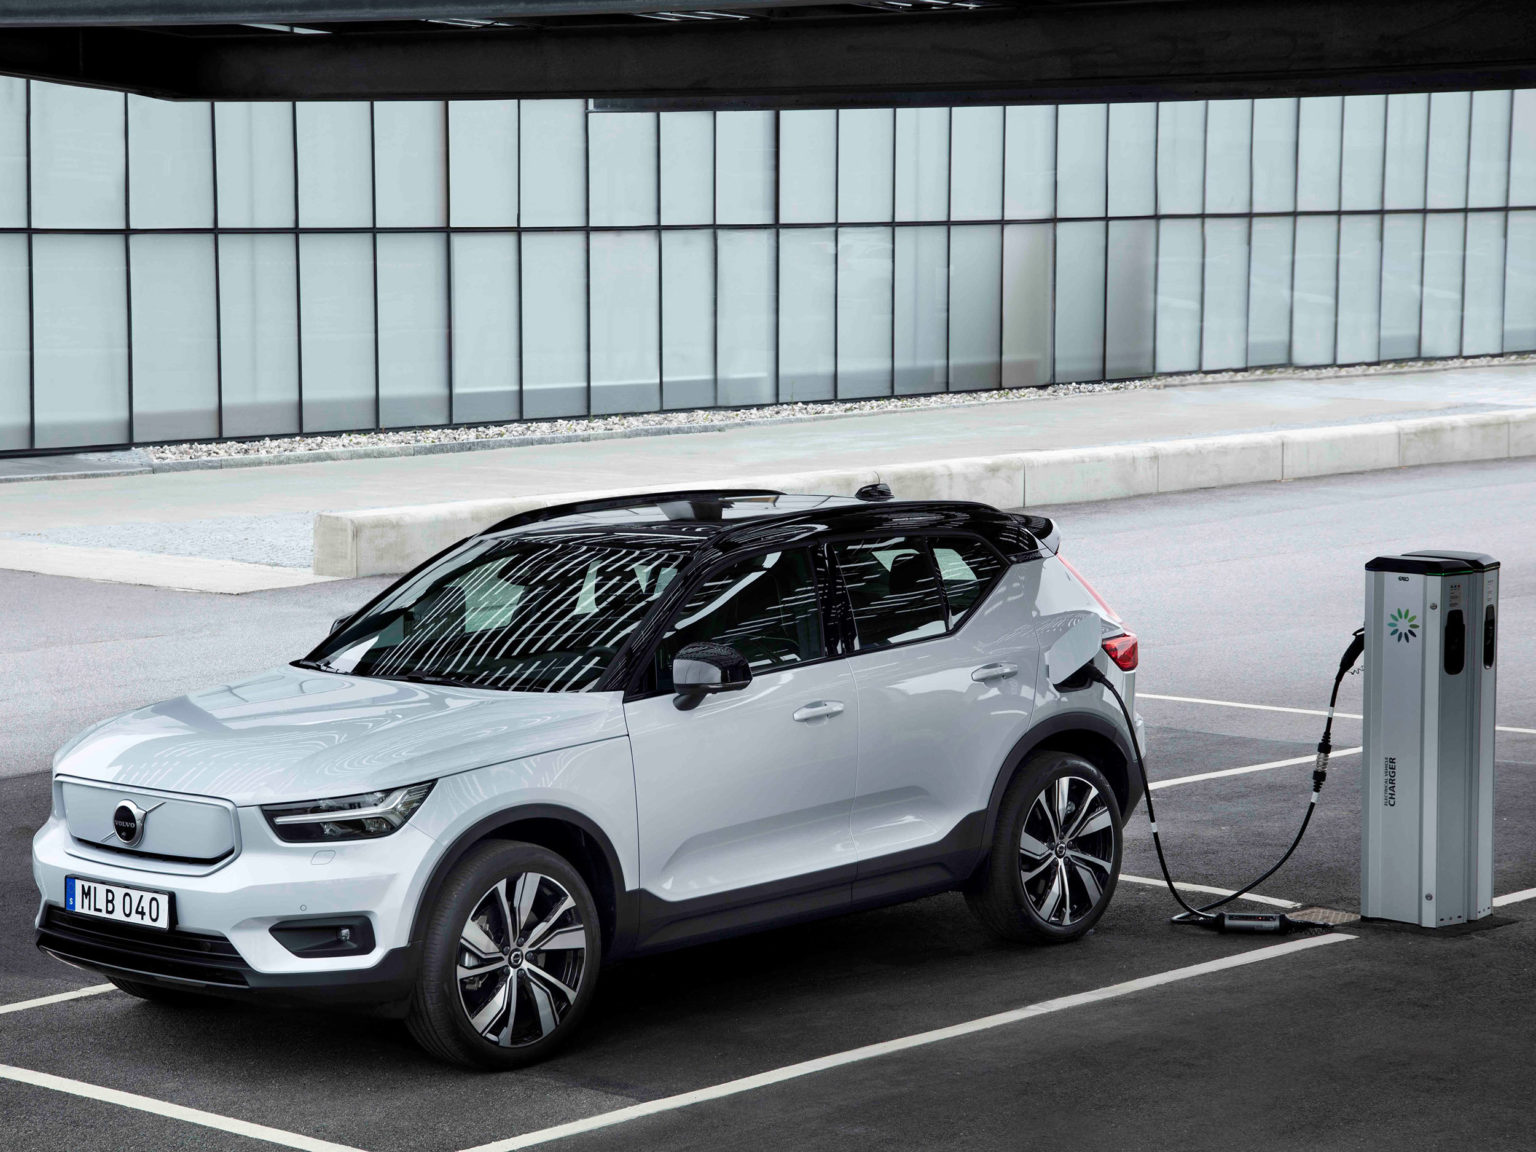 The 2021 Volvo XC40 Recharge is coming to dealerships soon.